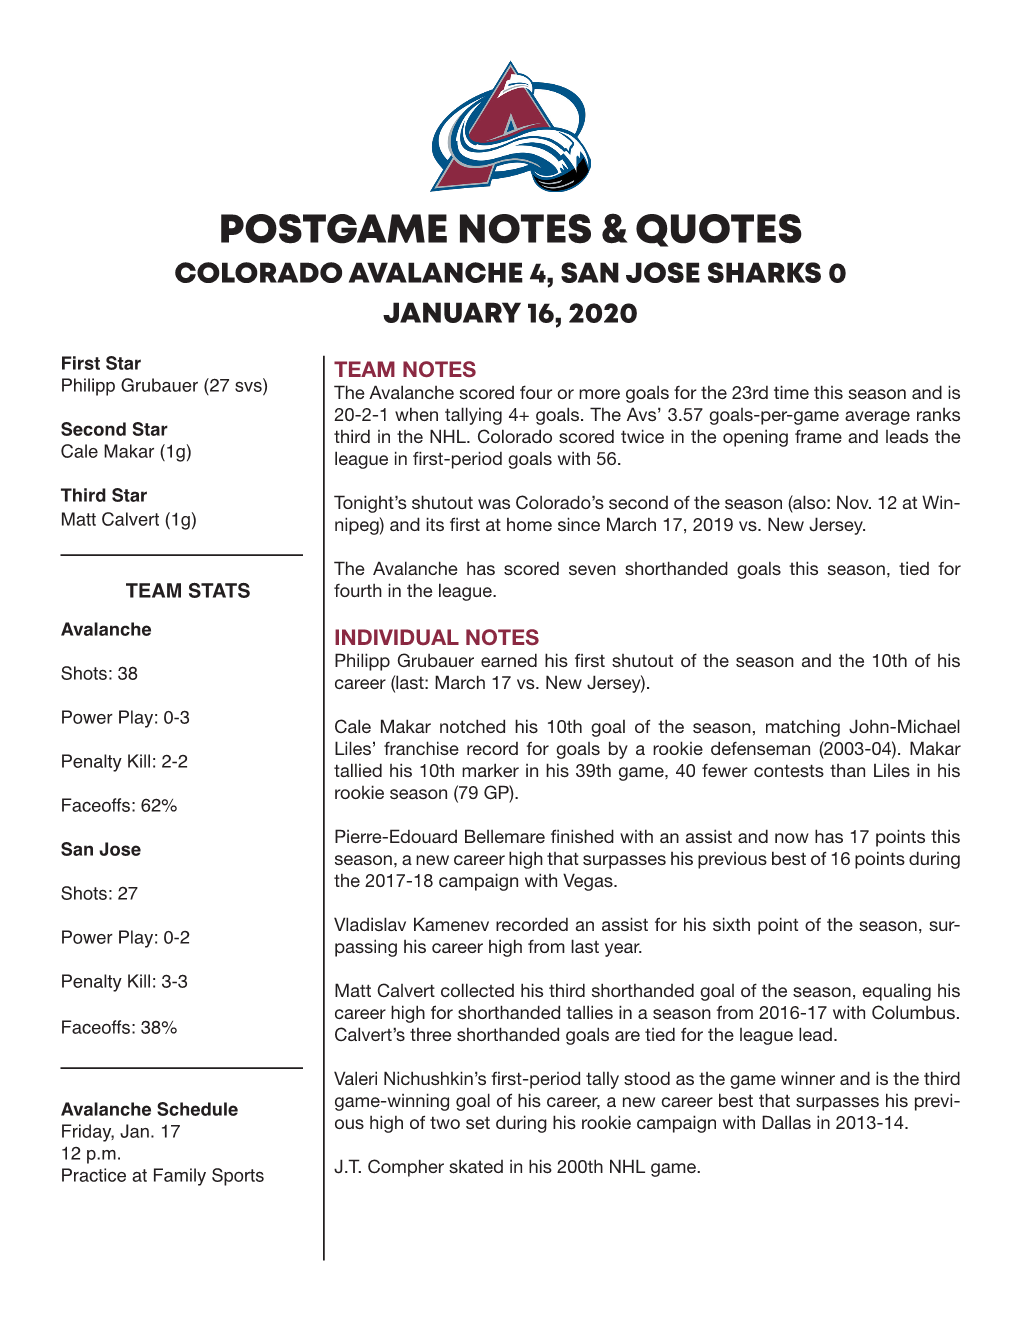 Postgame Notes & Quotes